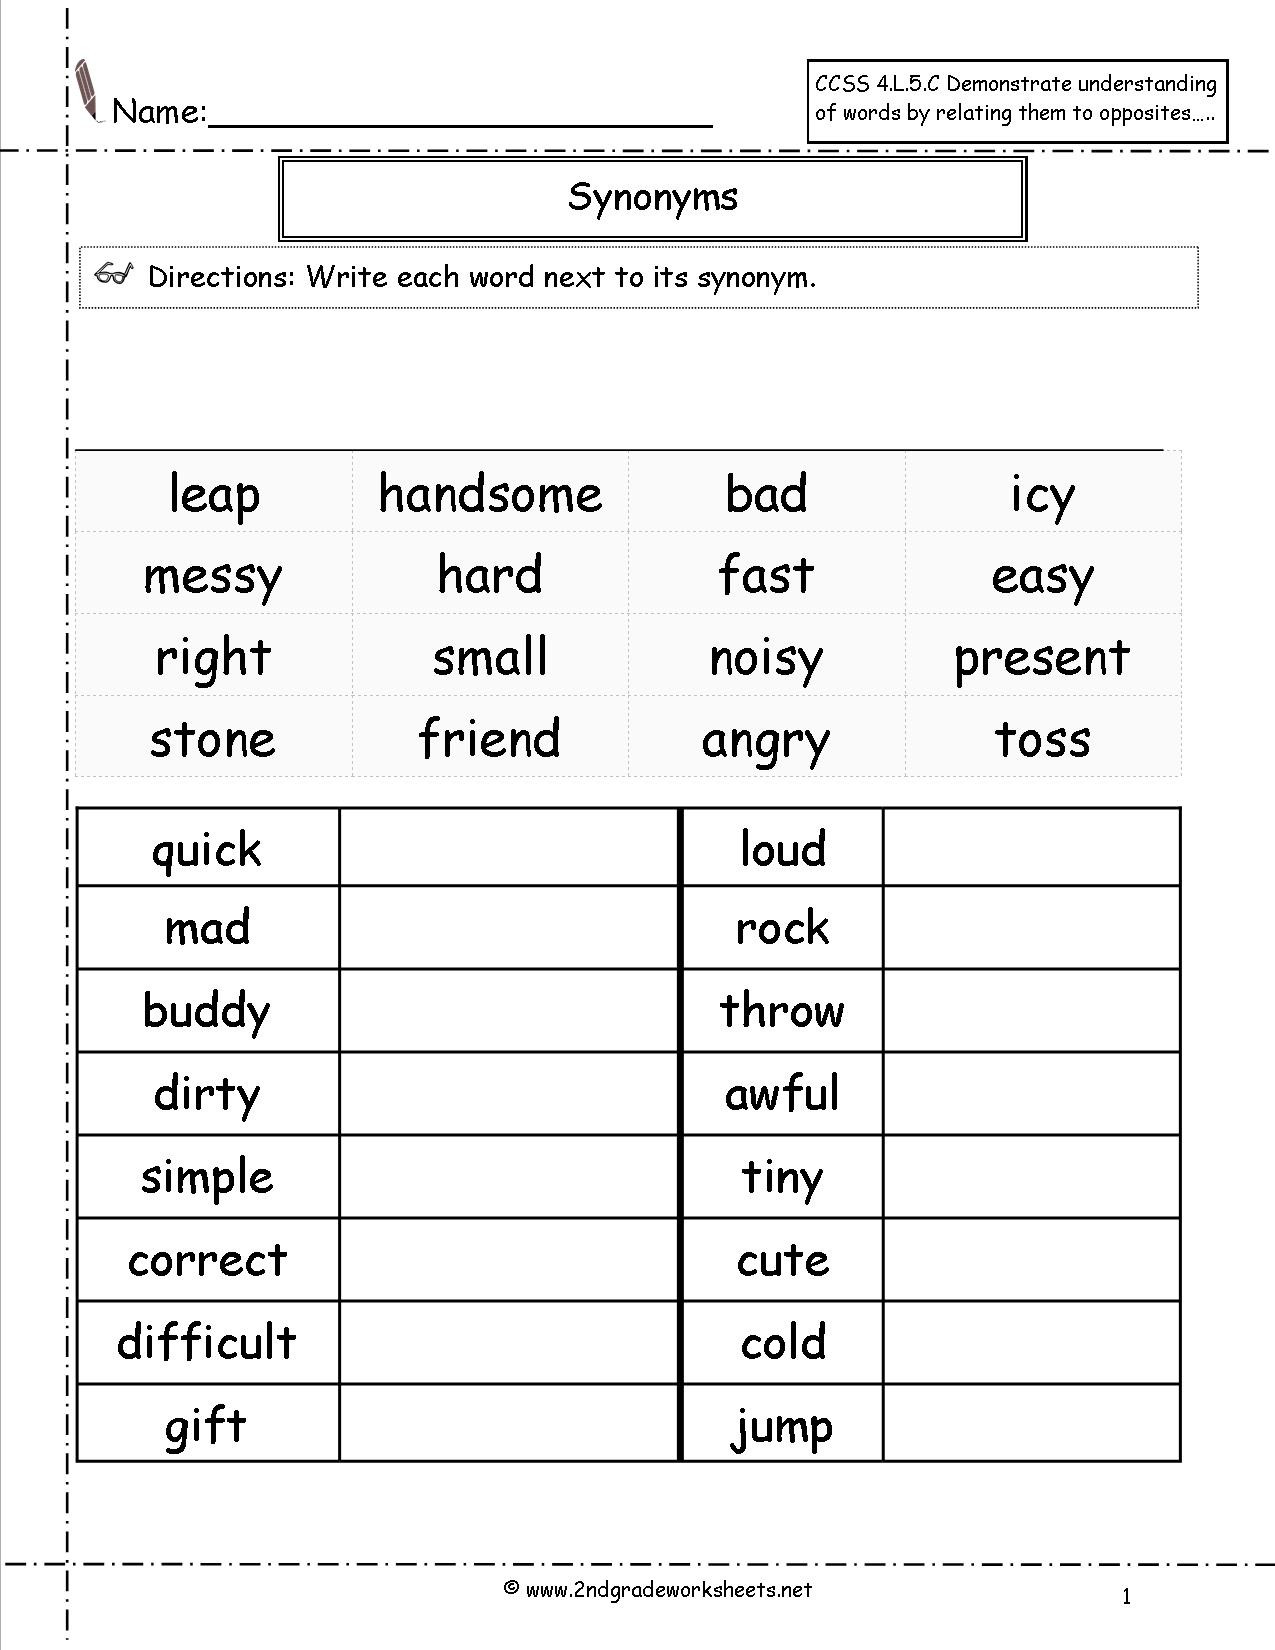 Antonyms Worksheets 3rd Grade Synonyms and Antonyms Worksheets